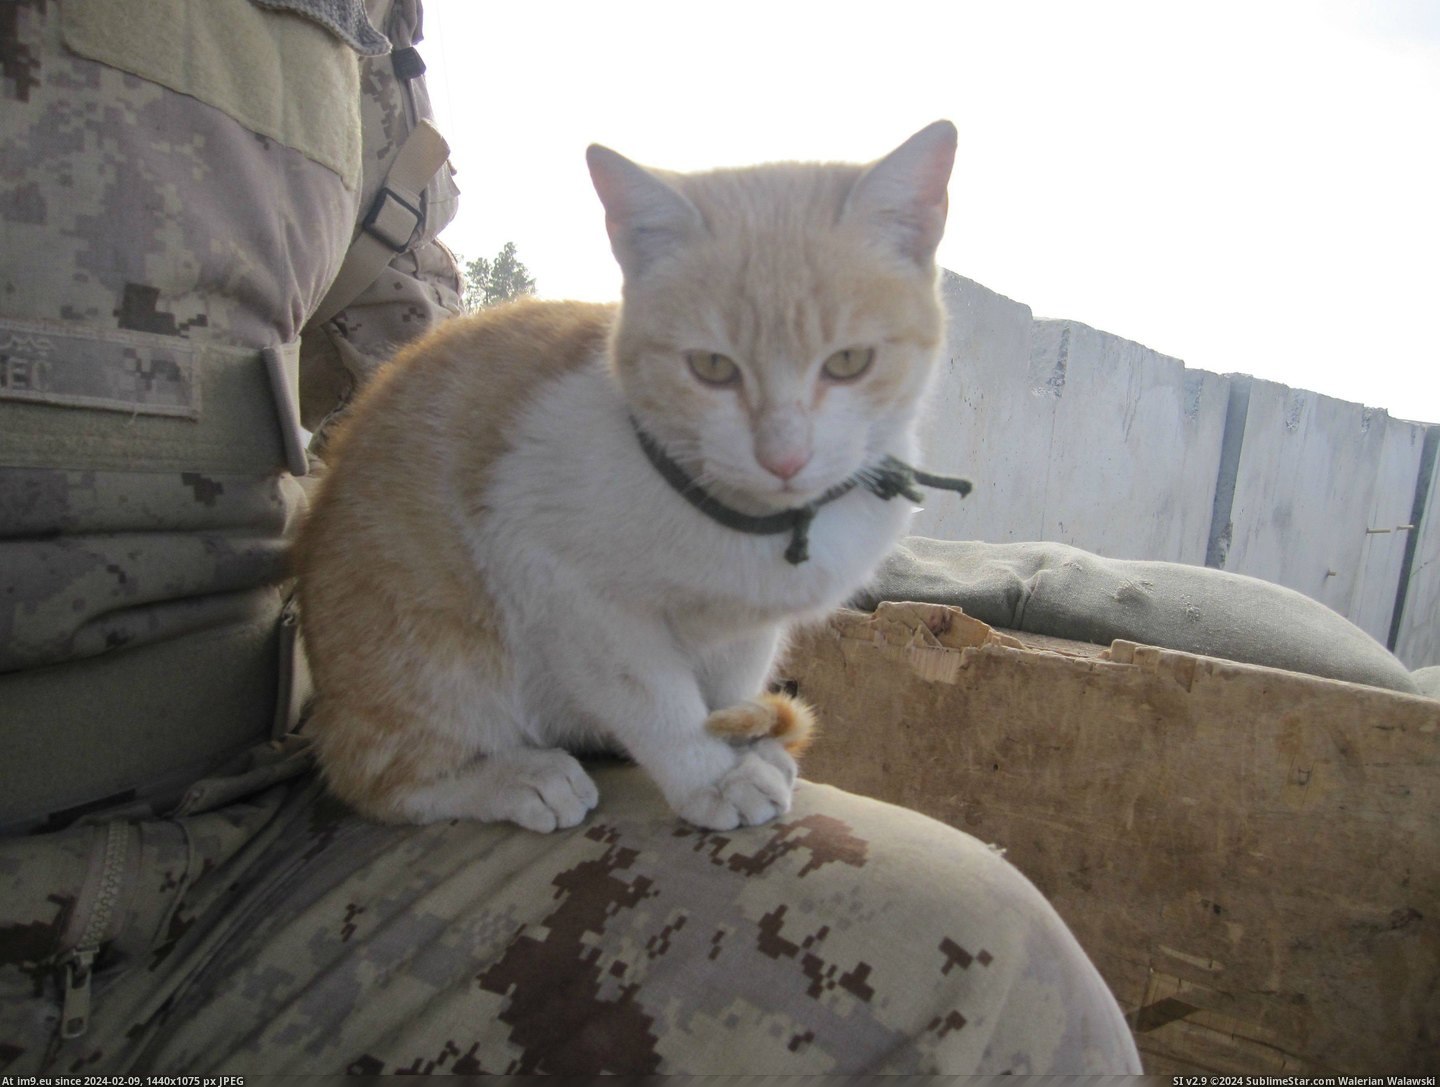 #Cats #Guard #Camp #Afghanistan #Cheetah #Tower #Helping [Cats] Tower Cheetah helping me guard my camp in Afghanistan. 9 Pic. (Image of album My r/CATS favs))